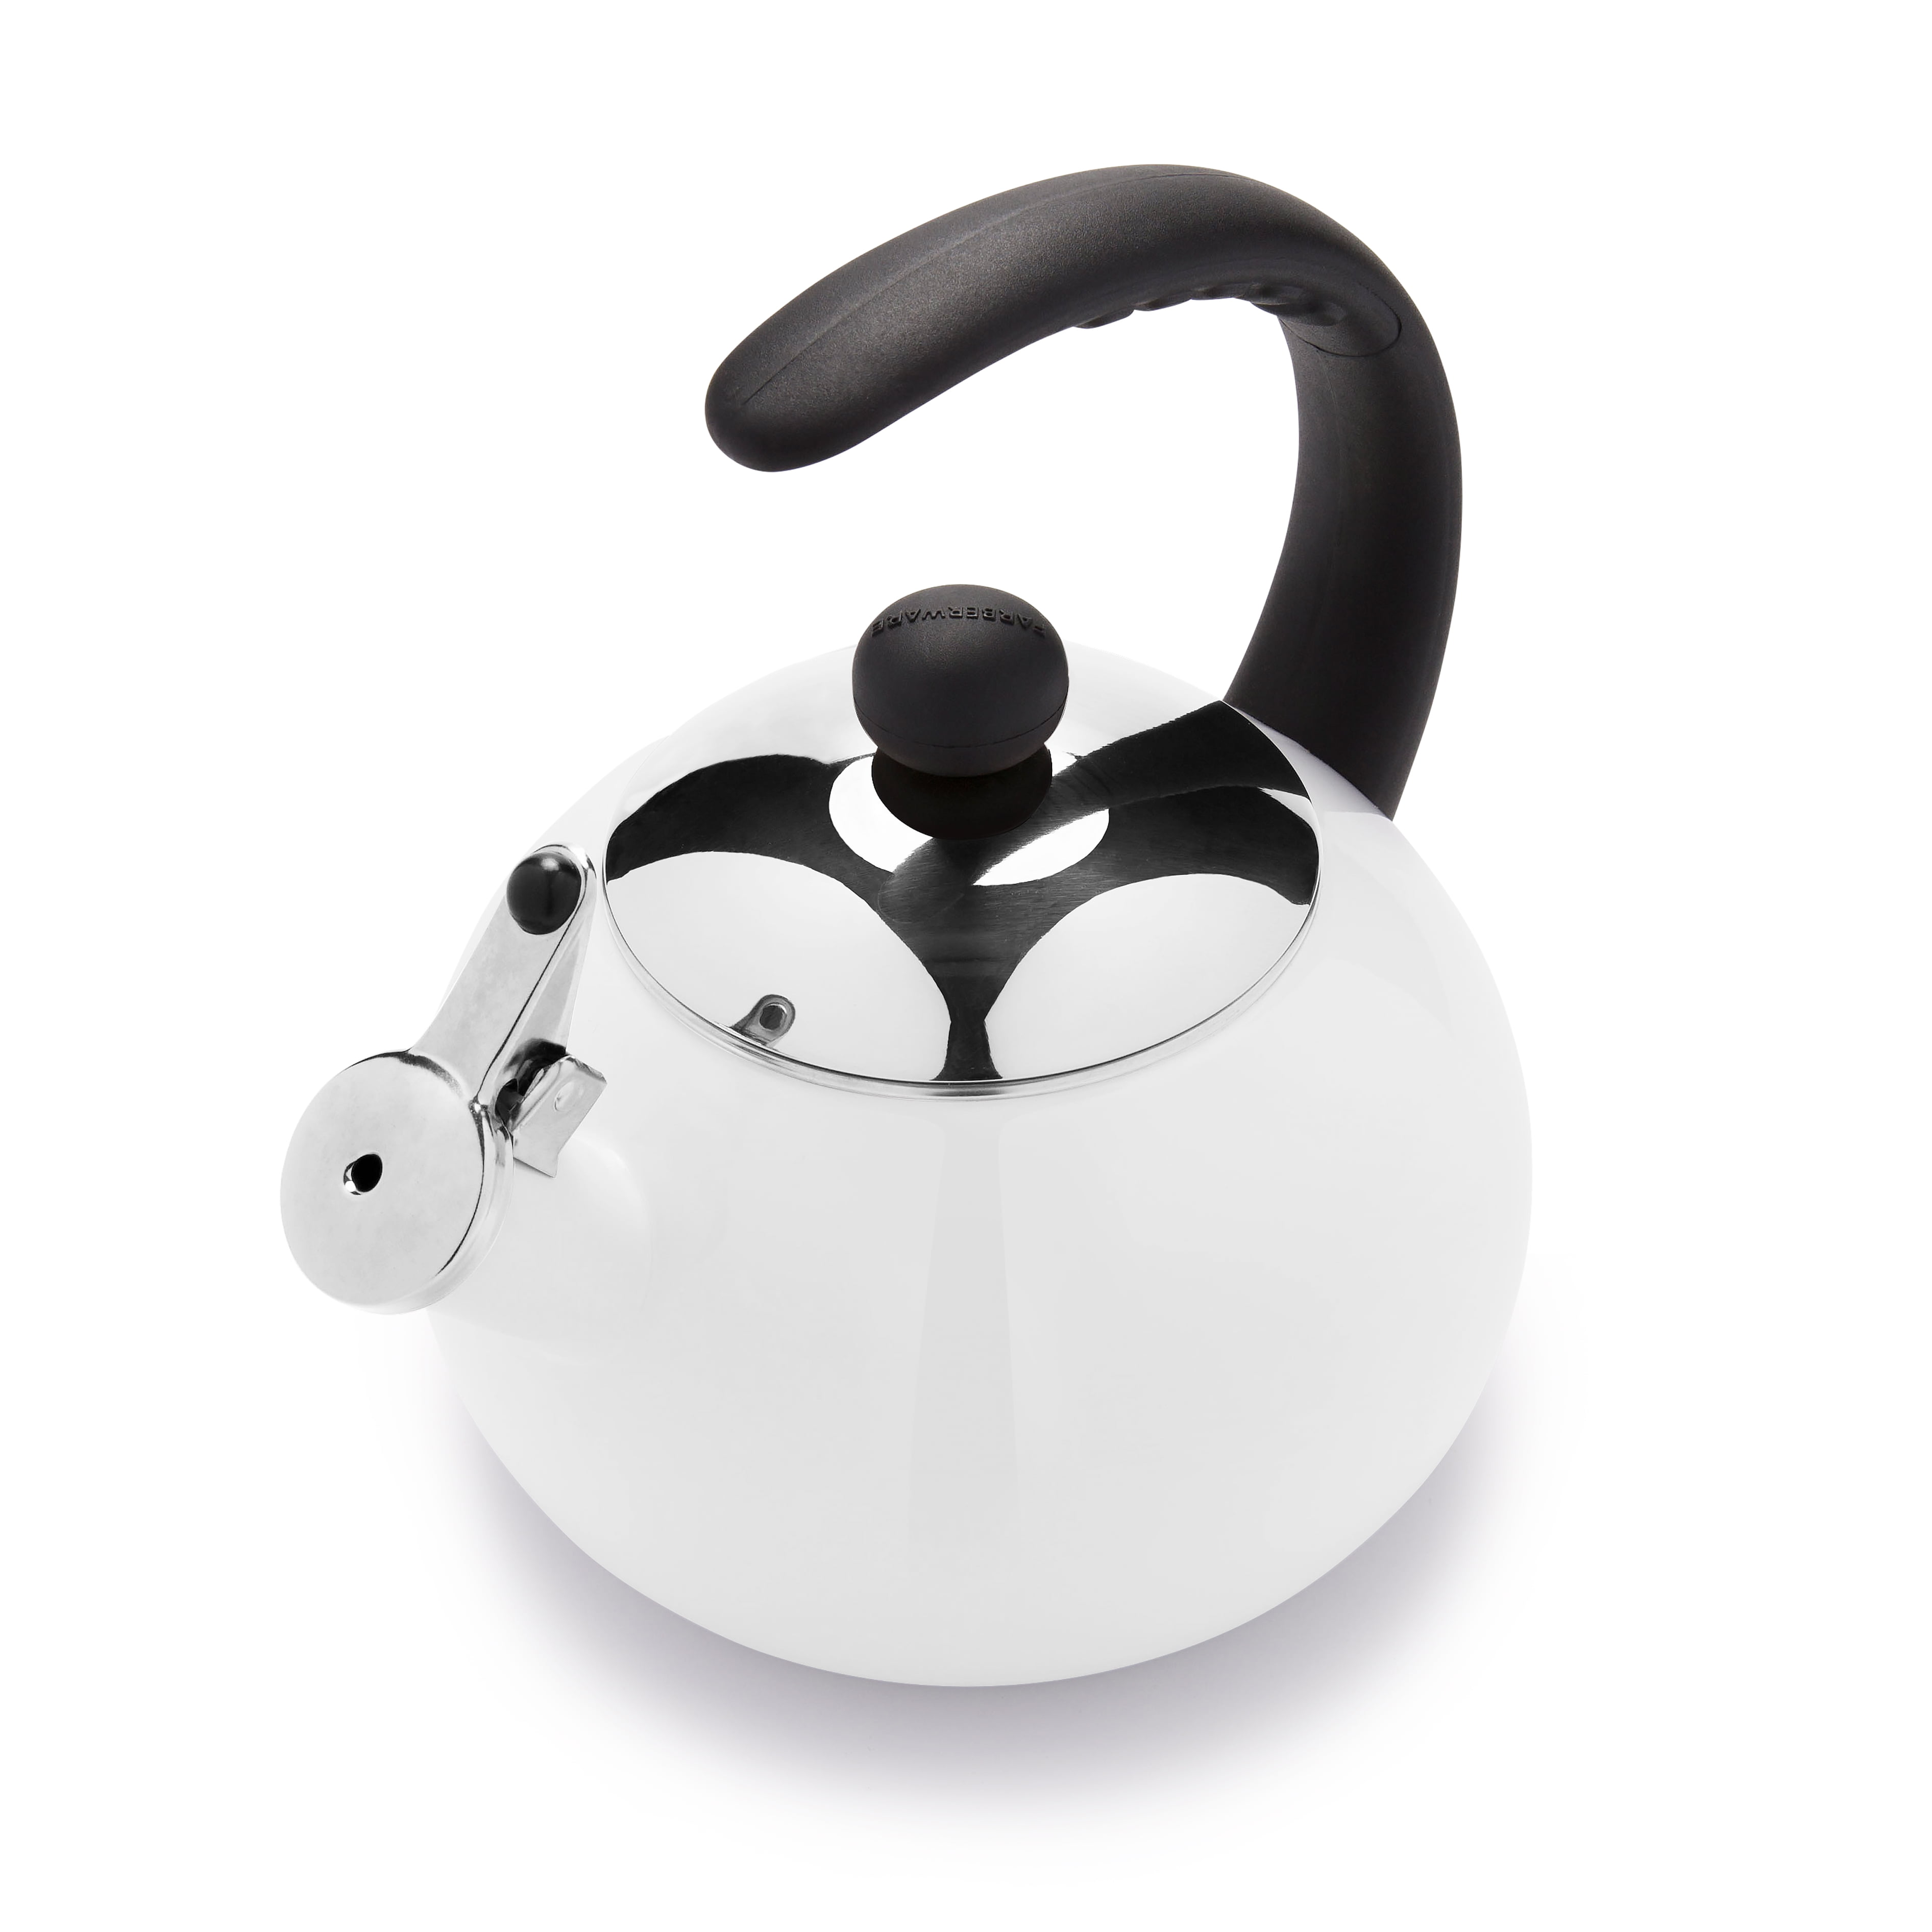 Farberware Luna Water Kettle, Whistling Tea Pot, Works For All Stovetops,  Porcelain Enamel on Carbon Steel, BPA-Free, Rust-Proof, Stay Cool Handle